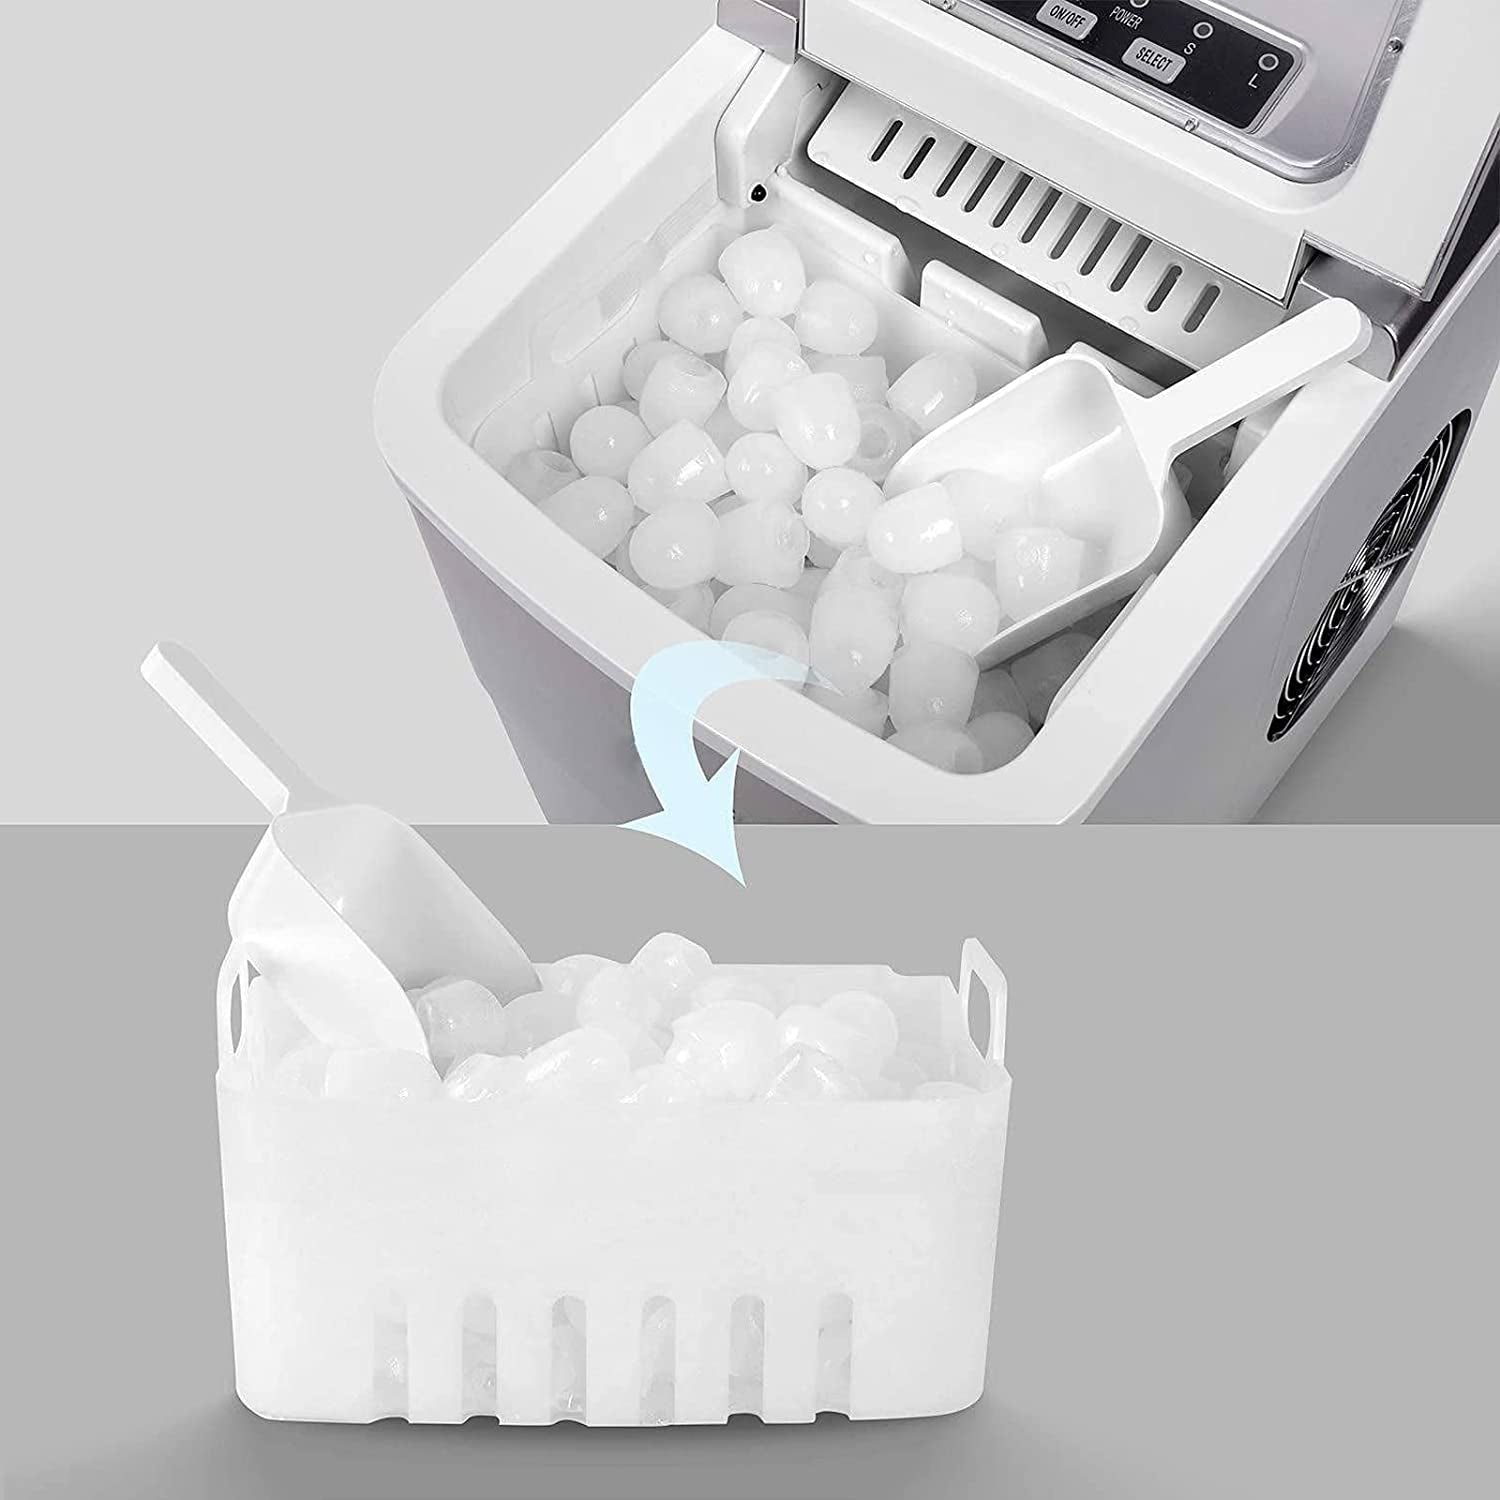 Ice Maker Machine for Home, Counter Top Ice Cube Maker, Portable Ice Cream Maker with 2L Tank | Ice Cubes in under 8 Mins No Plumbing Required, Includes Scoop & Removable Basket (Sliver)